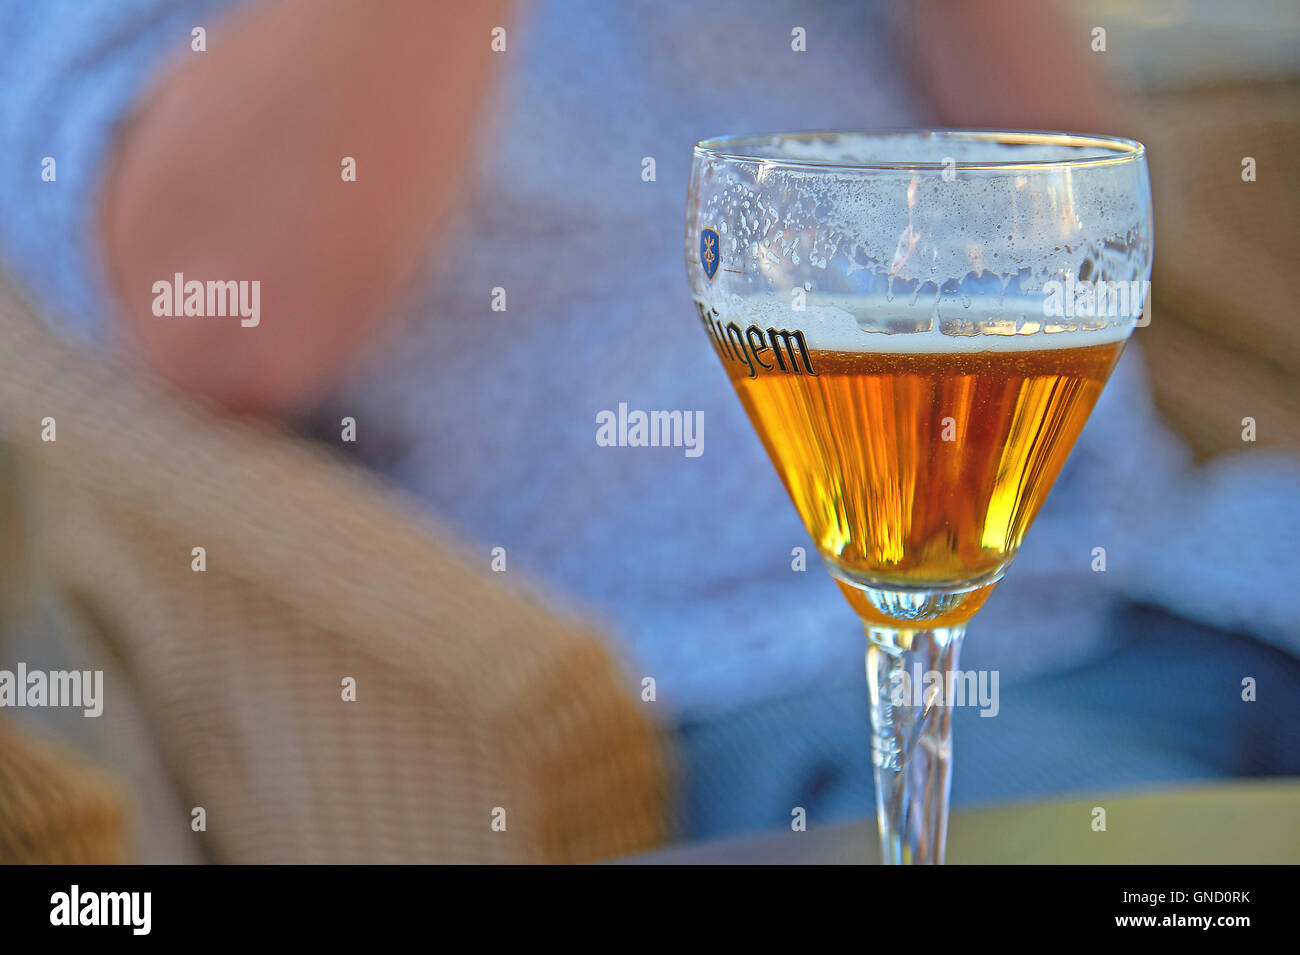 Half drunk glass of lager beer in a fluted glass Stock Photo